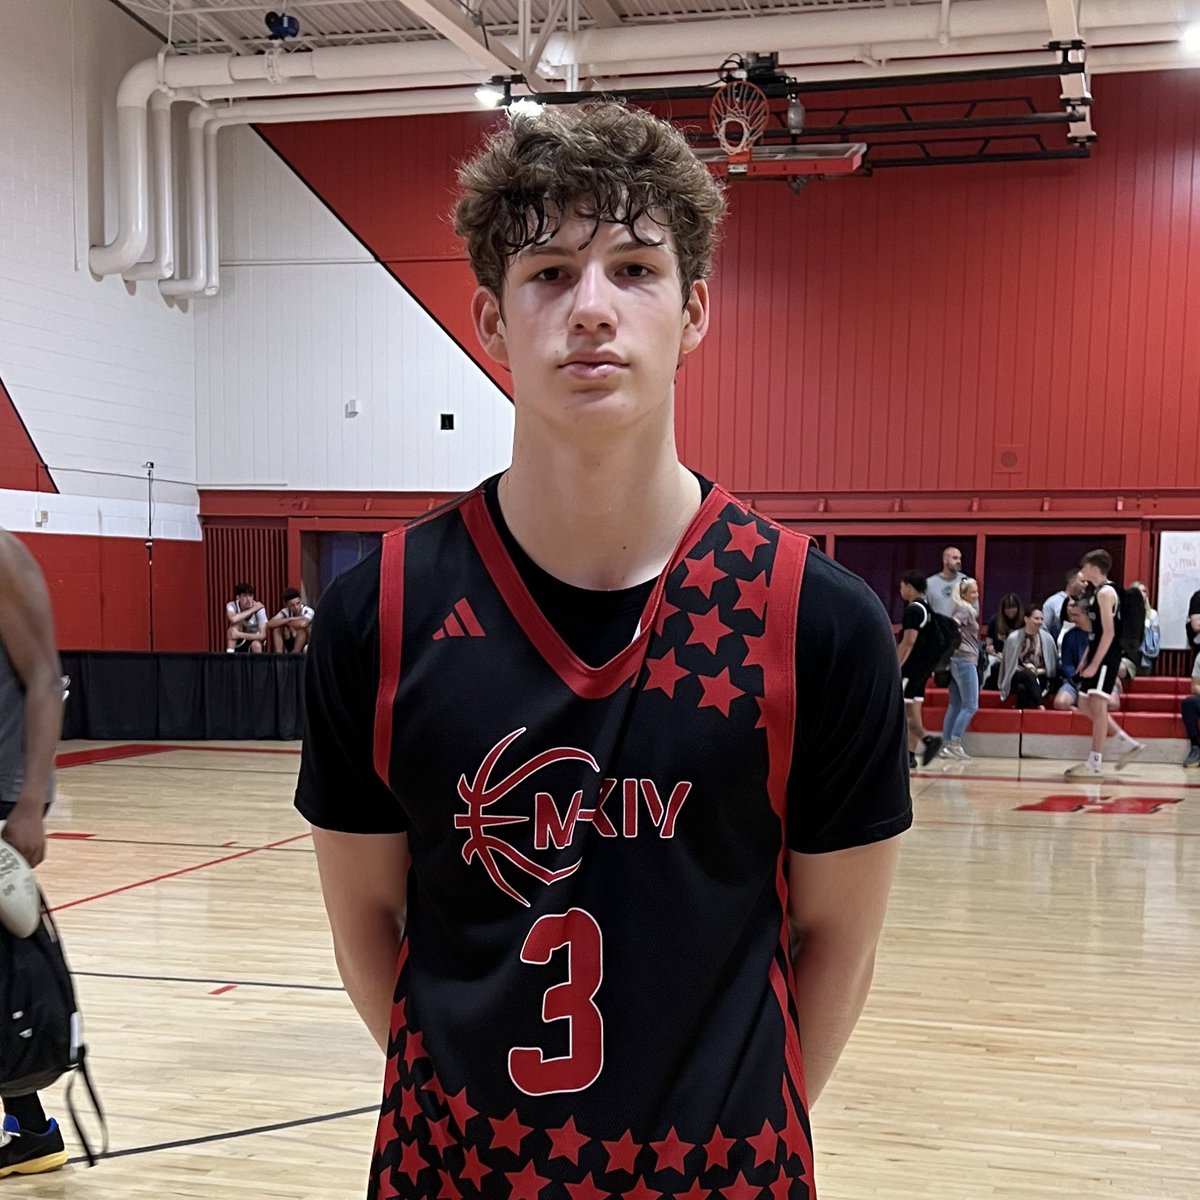 2025 6’7 Jax Abalos helped @M14Hoops_Boys to a big win over Mercury Elite. 6’7 lefty is a pure shooter with a quick release - finished with 20 points and hit 4 threes - and also showed some above the rim athleticism. @ny2lasports